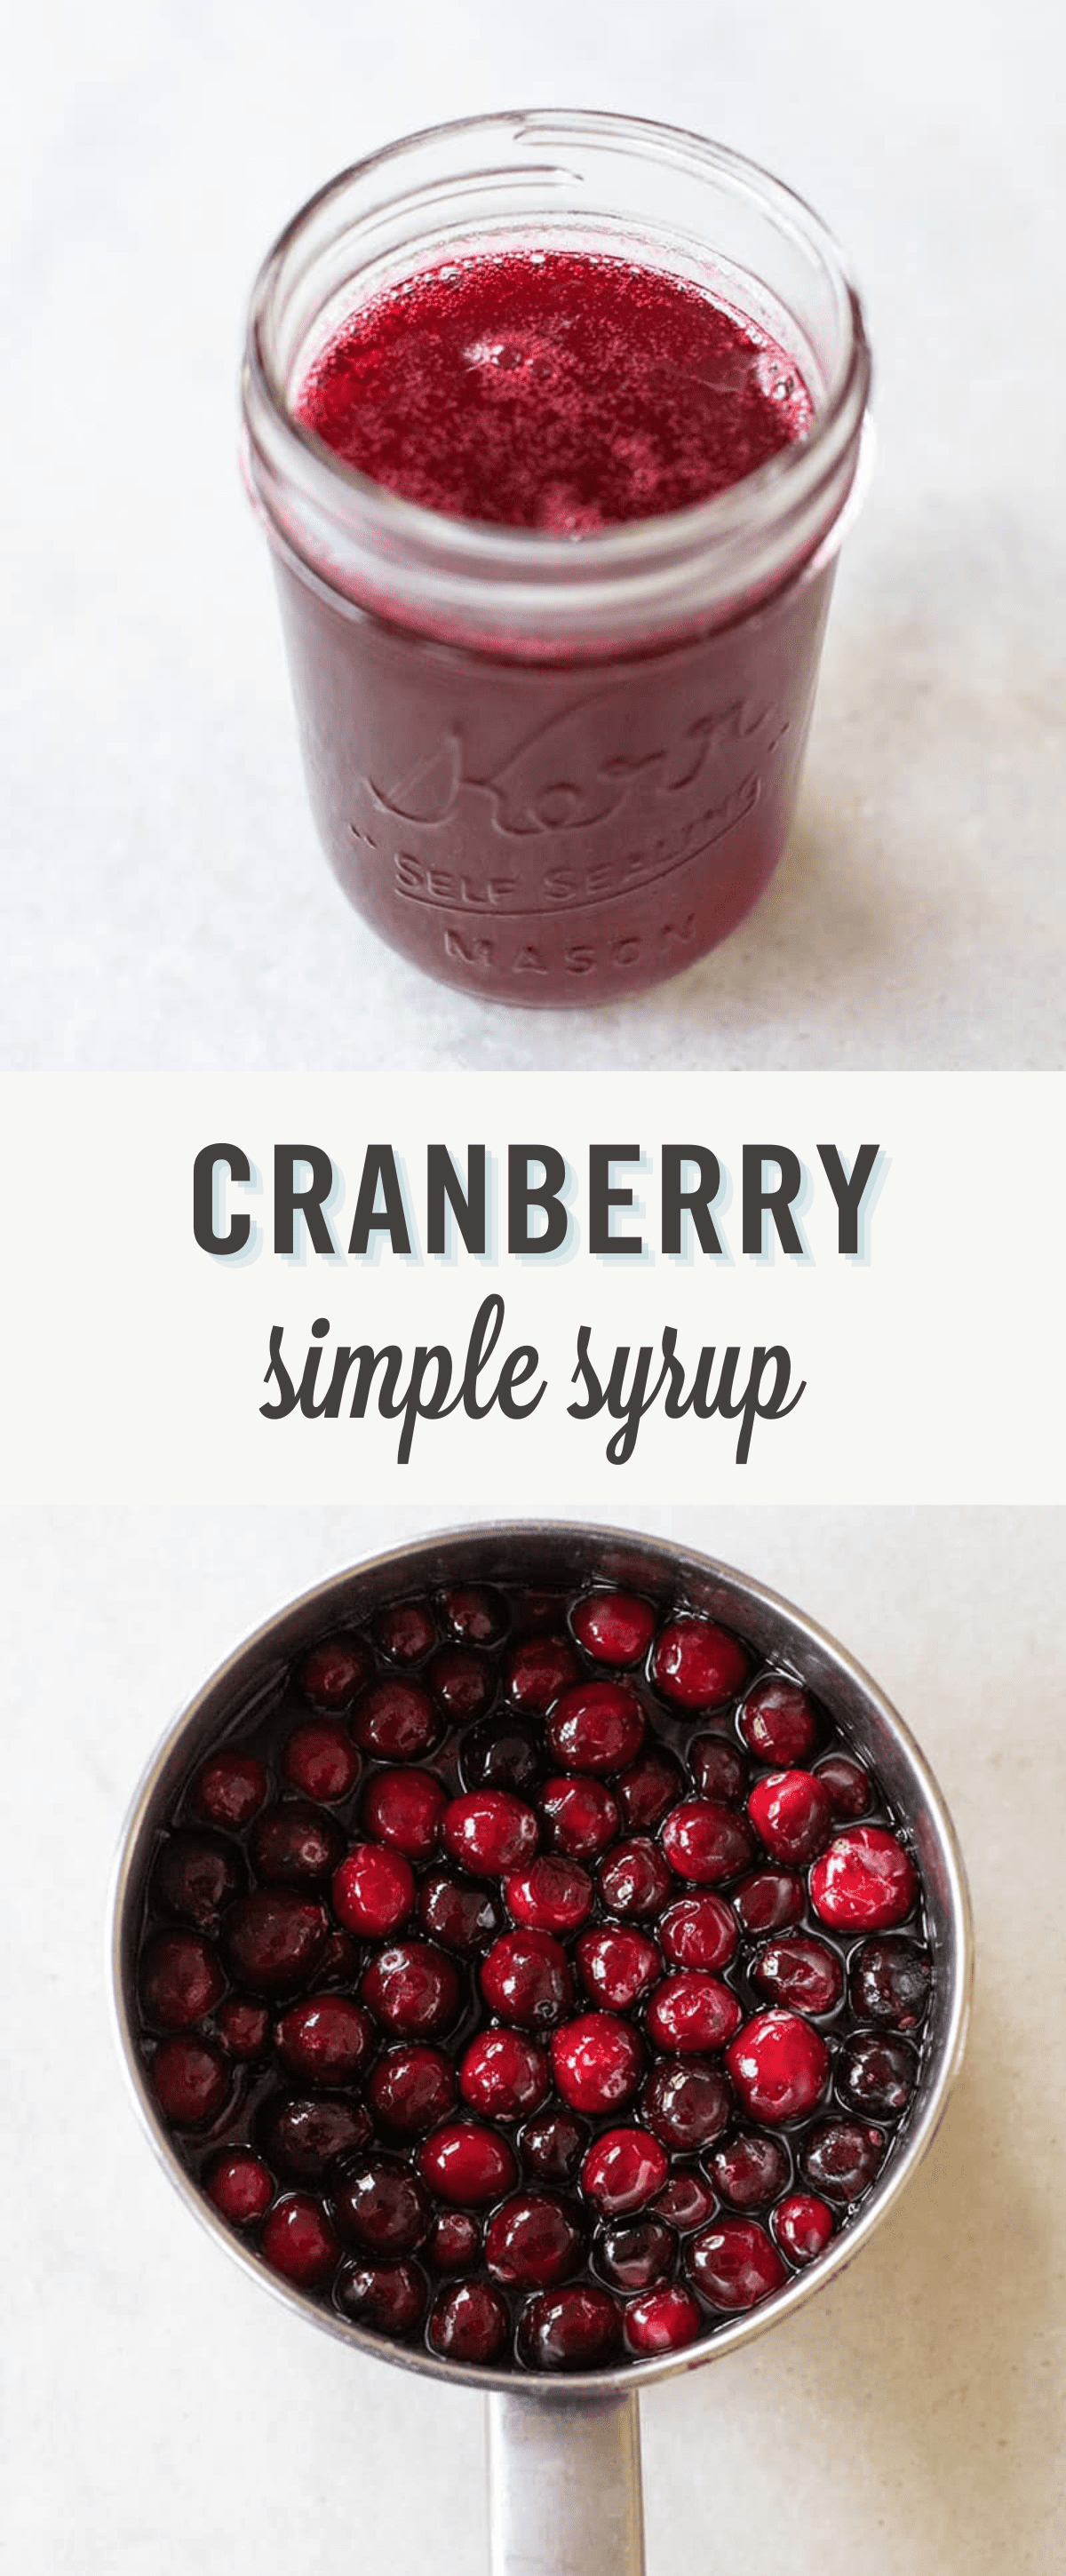 cranberry simple syrup with text.